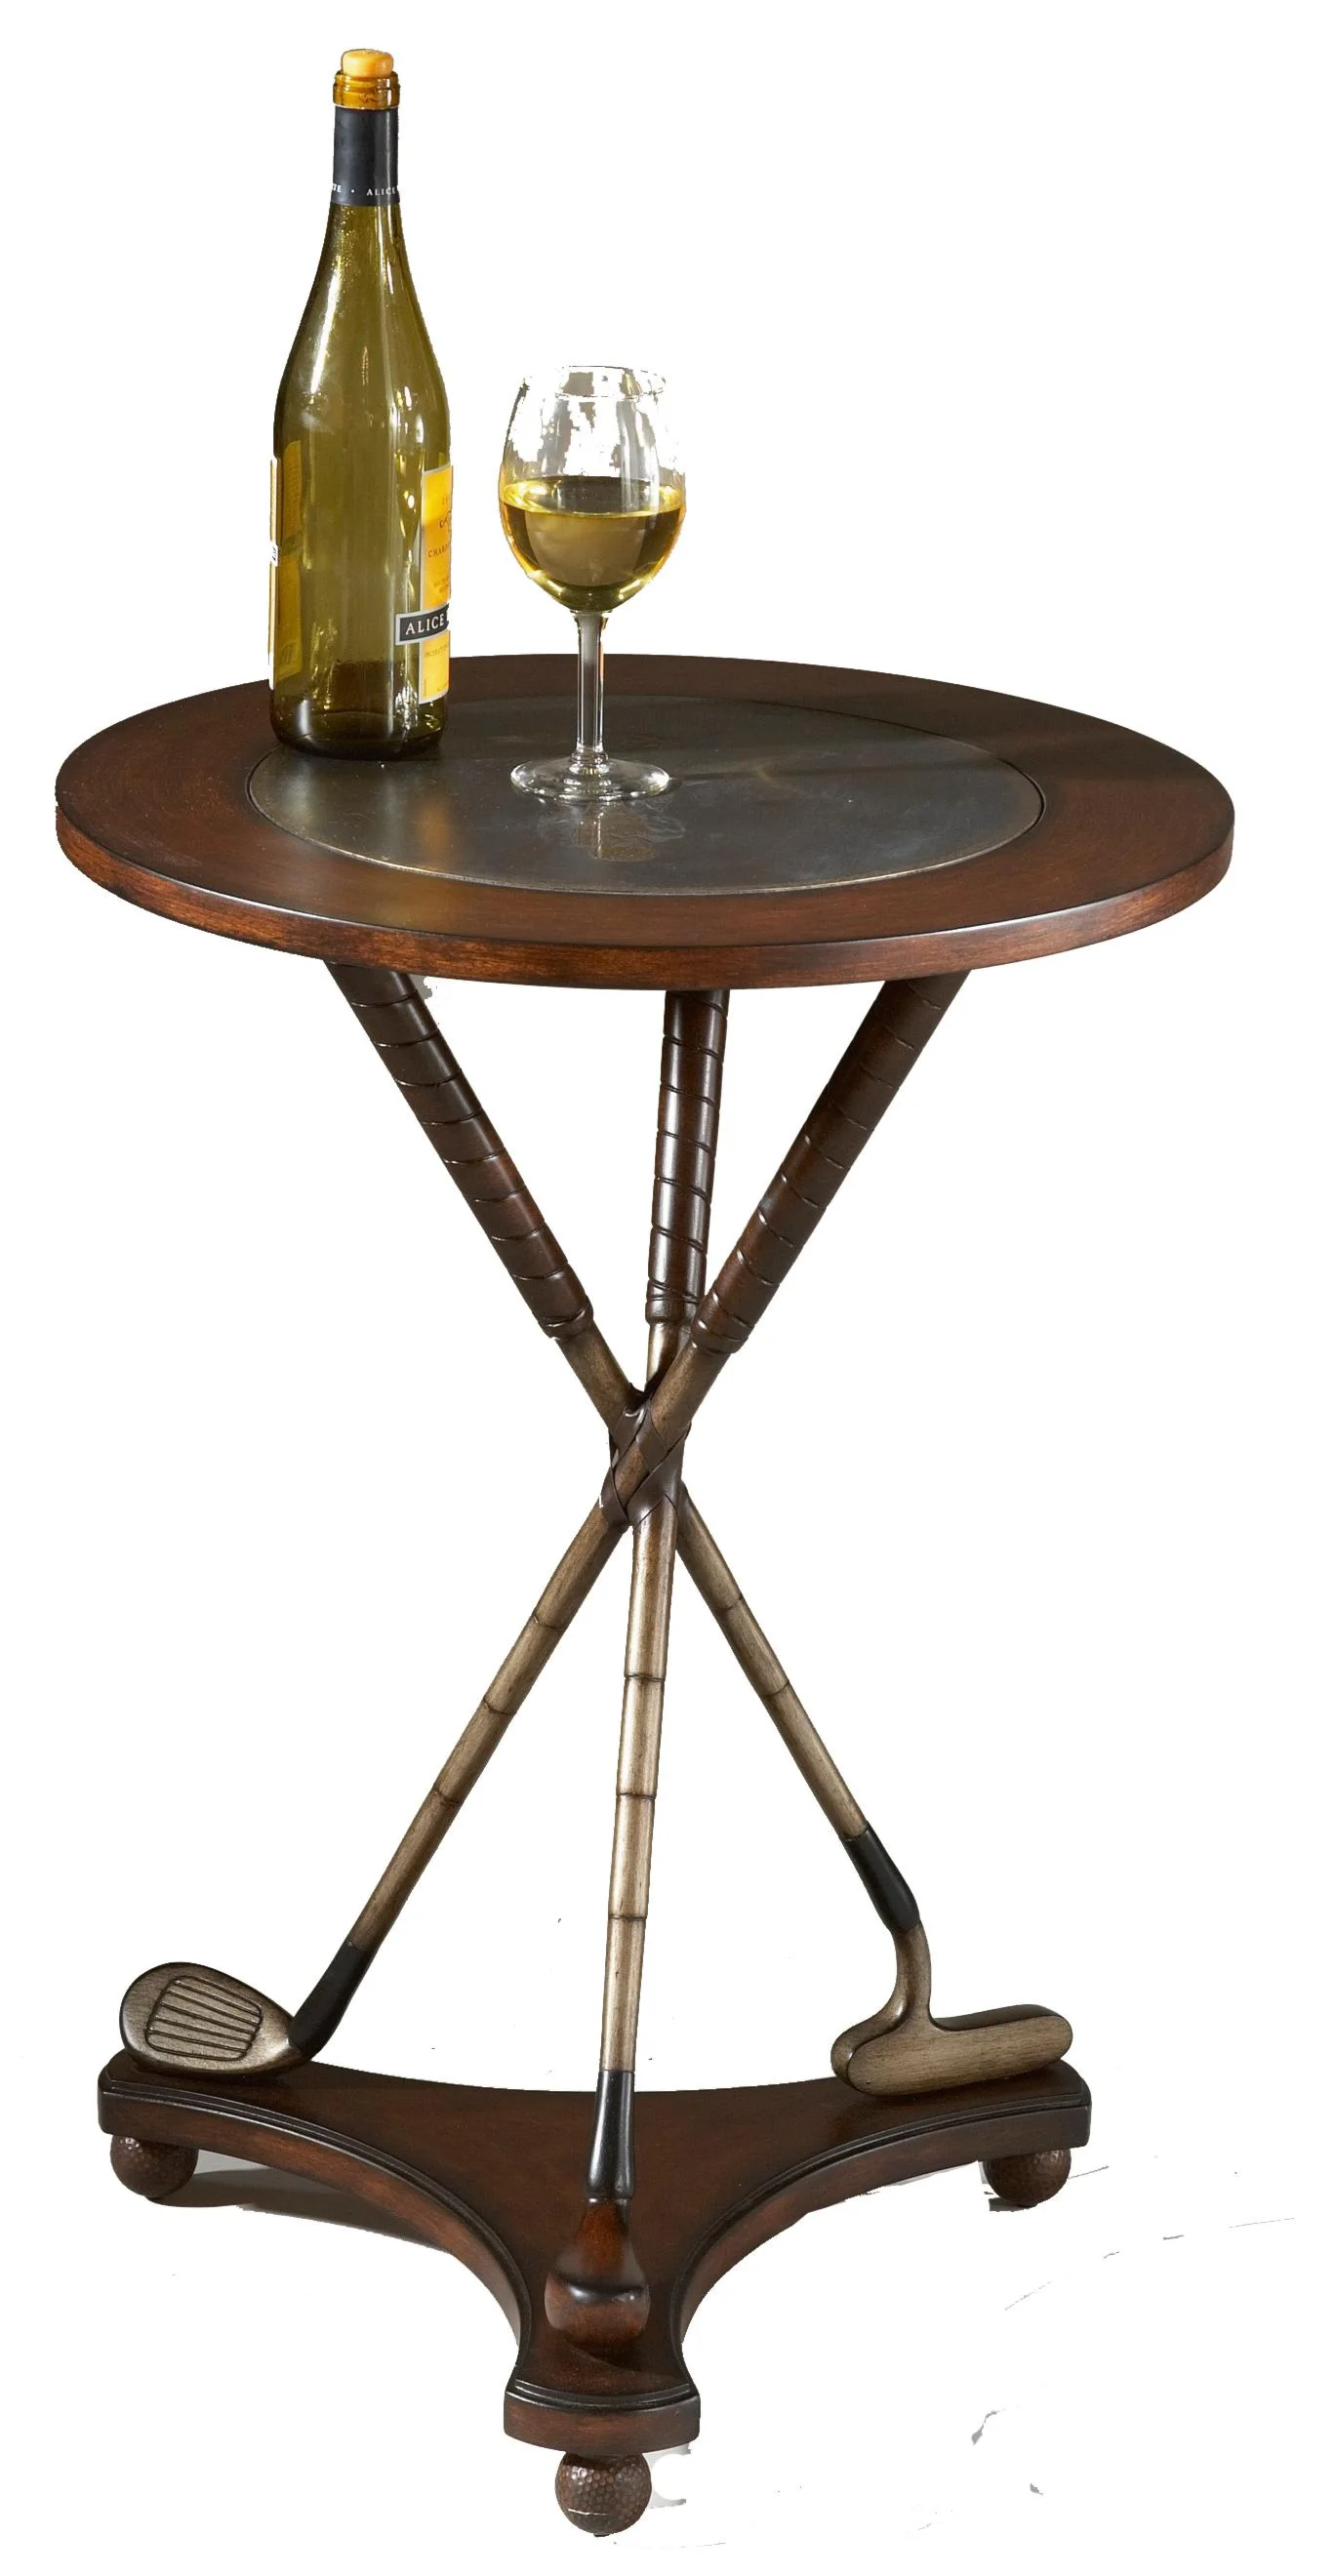 Butler Specialty Company Heritage 0553070 Bombe Trunk Table, Jacksonville  Furniture Mart